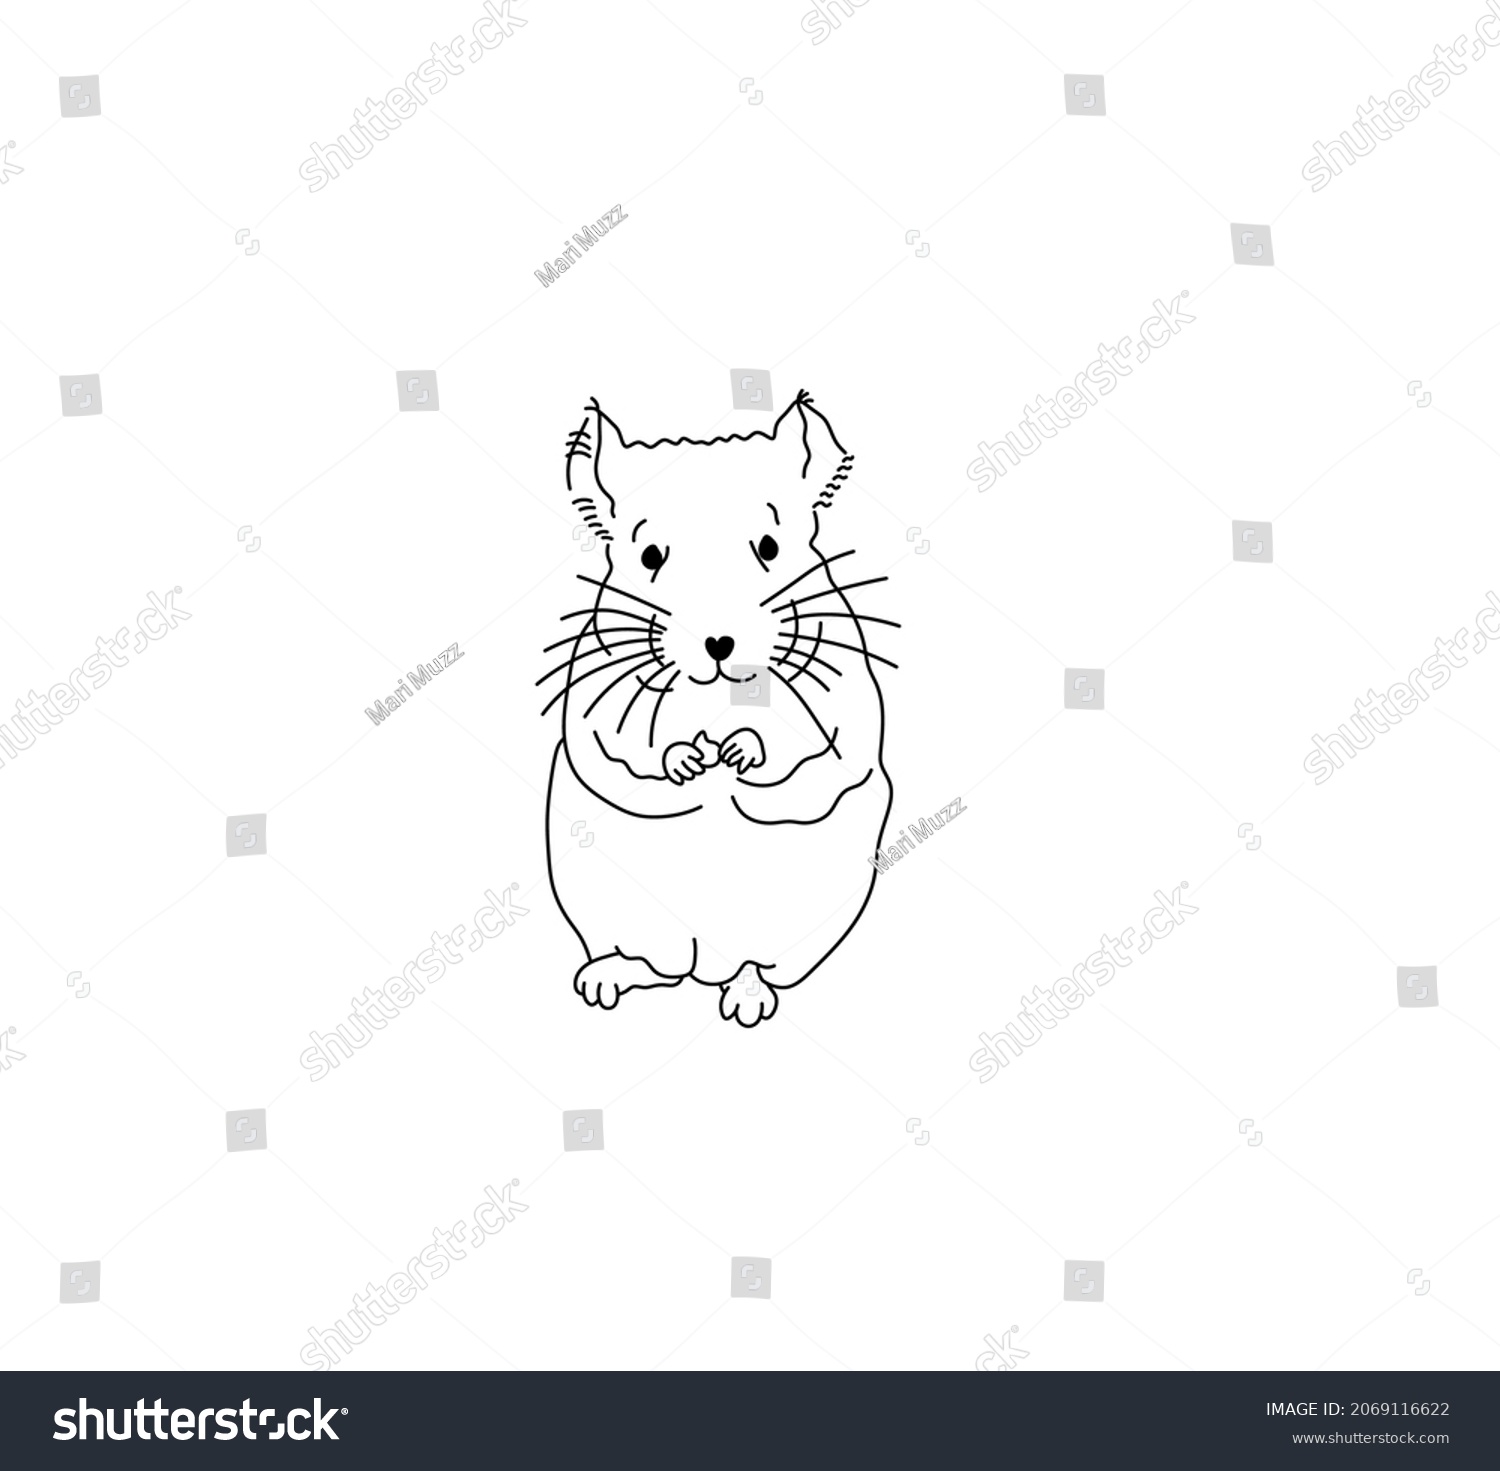 SVG of Vector isolated chinchilla standing on its hind legs contour line drawing. Colorless black and white drawn chinchilla svg